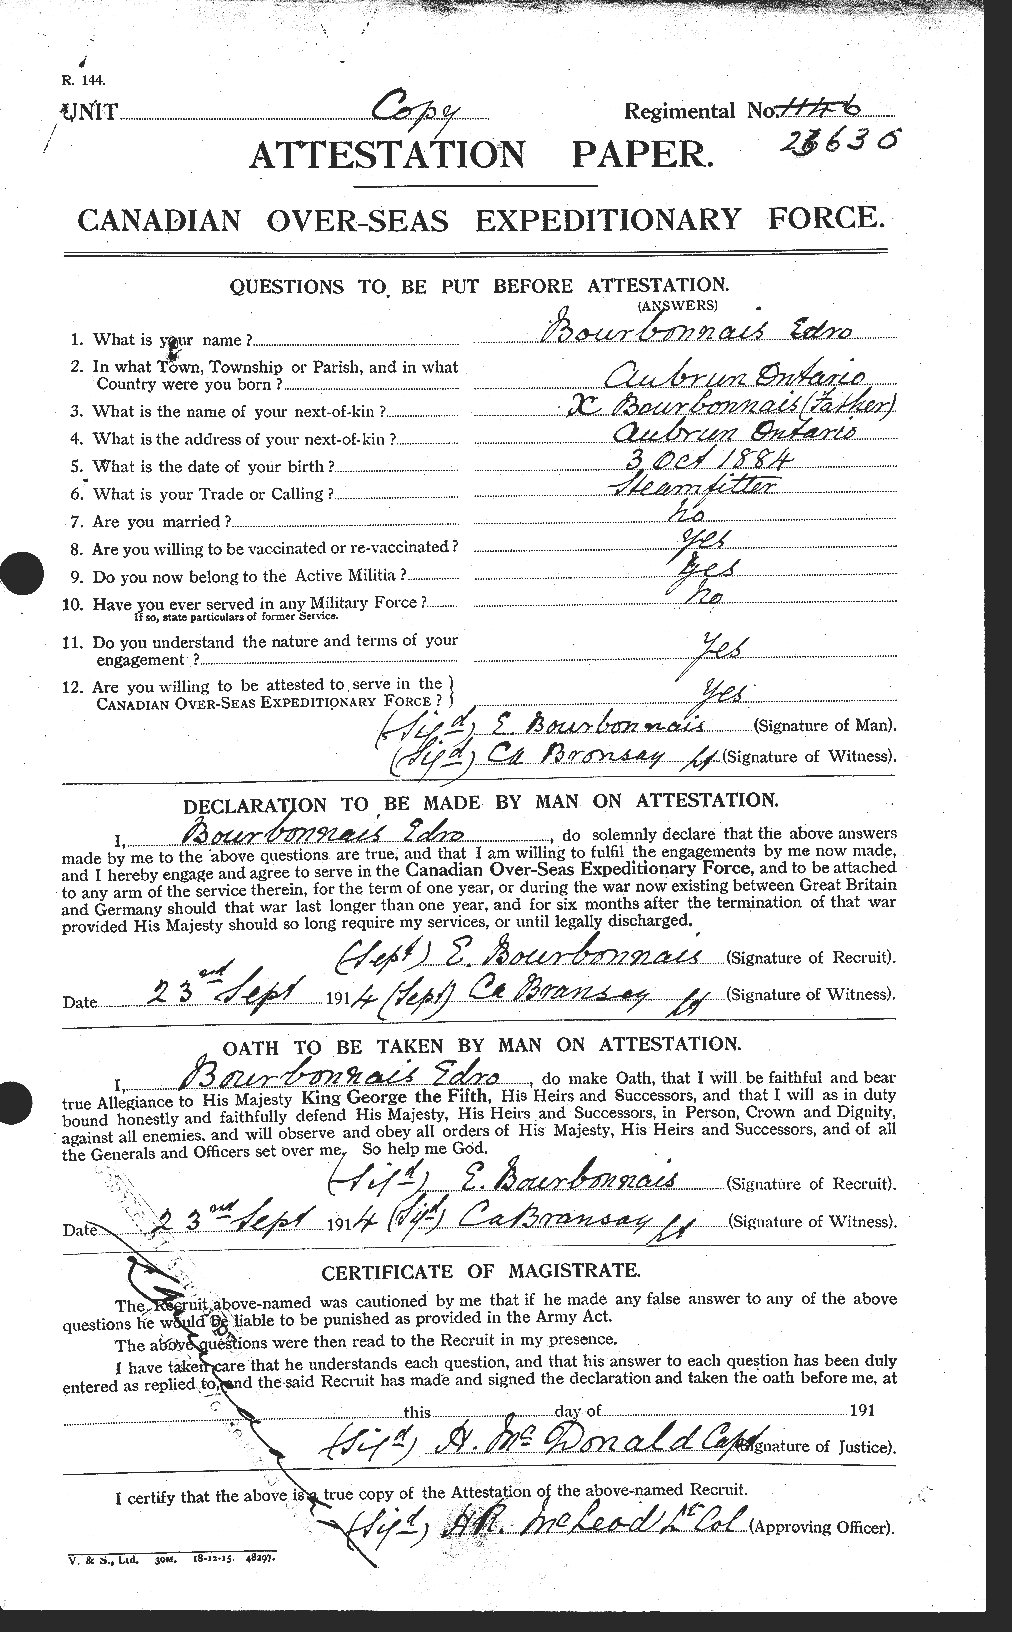 Personnel Records of the First World War - CEF 253259a